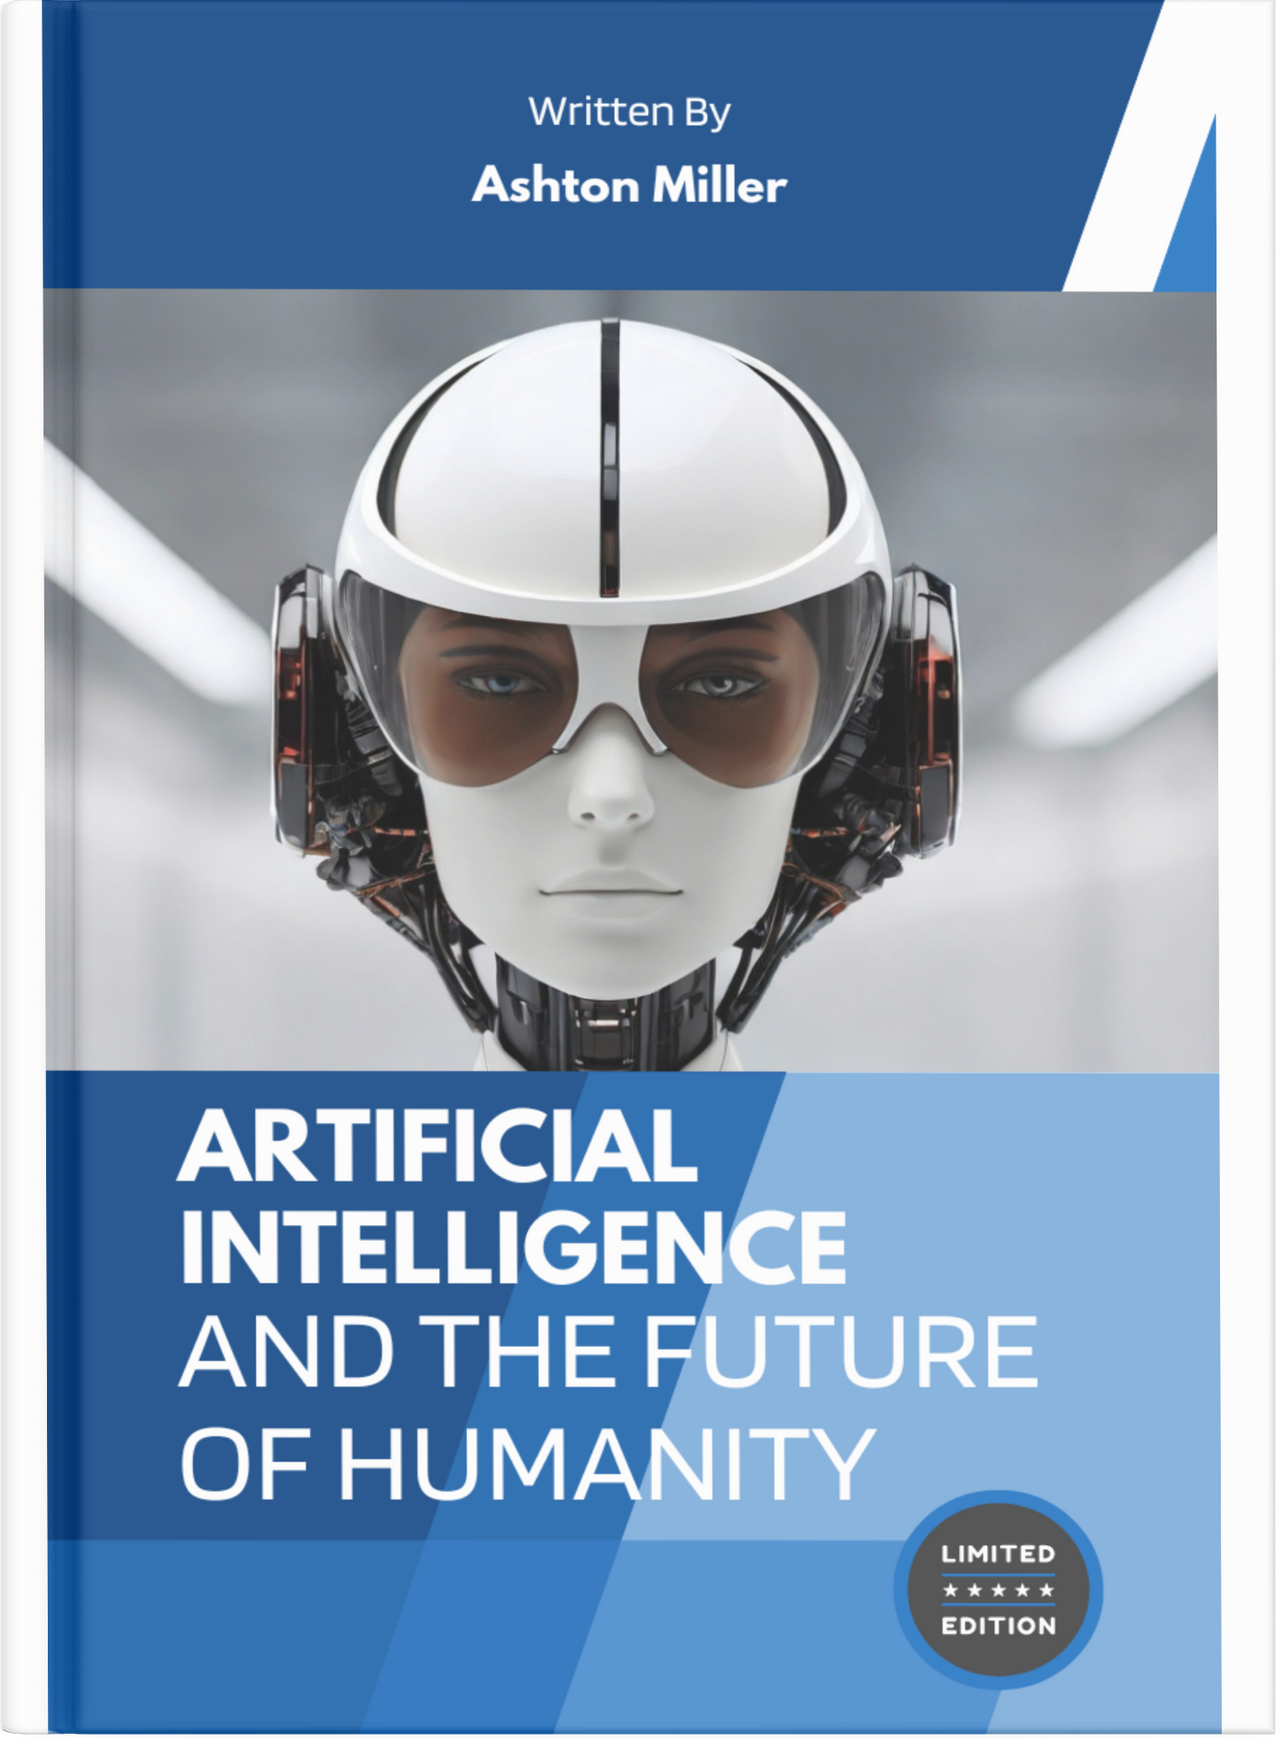 Artificial Intelligence and the Future of Humanity